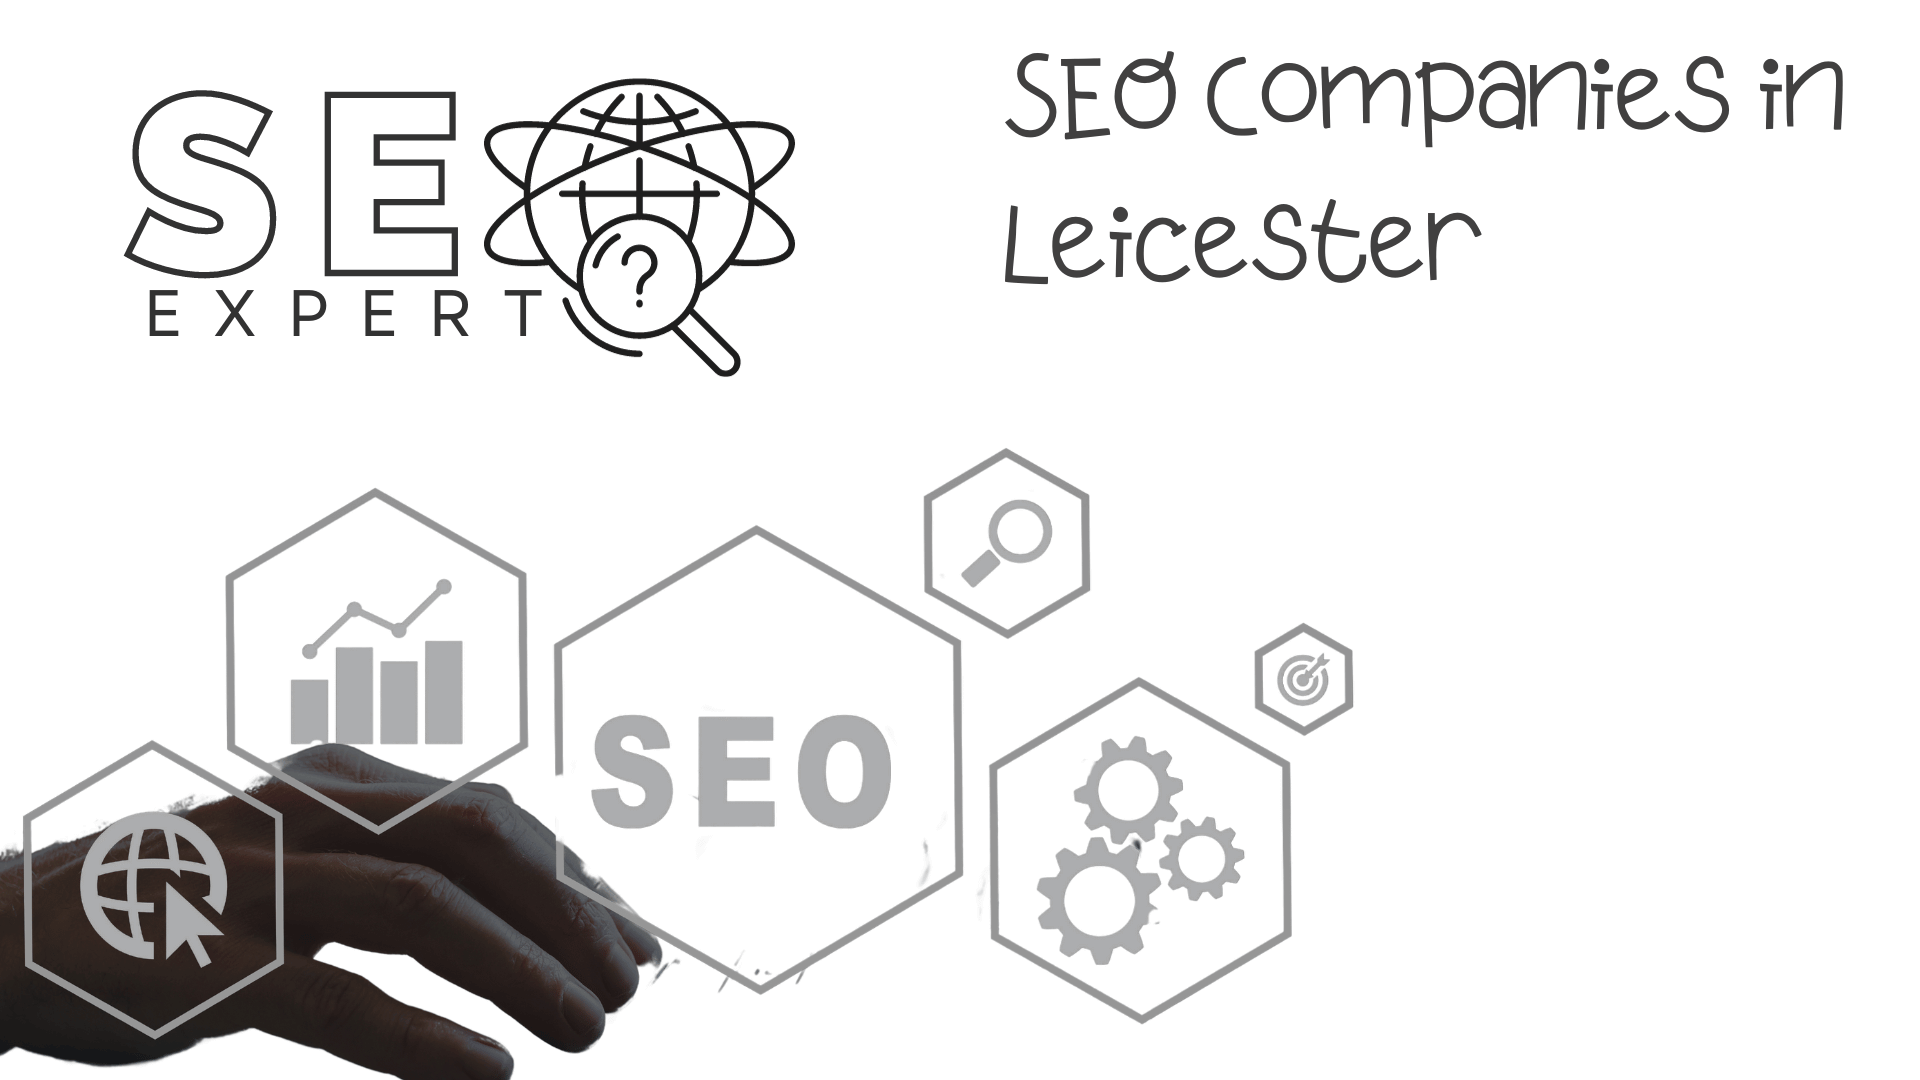 SEO Organizations in Leicester